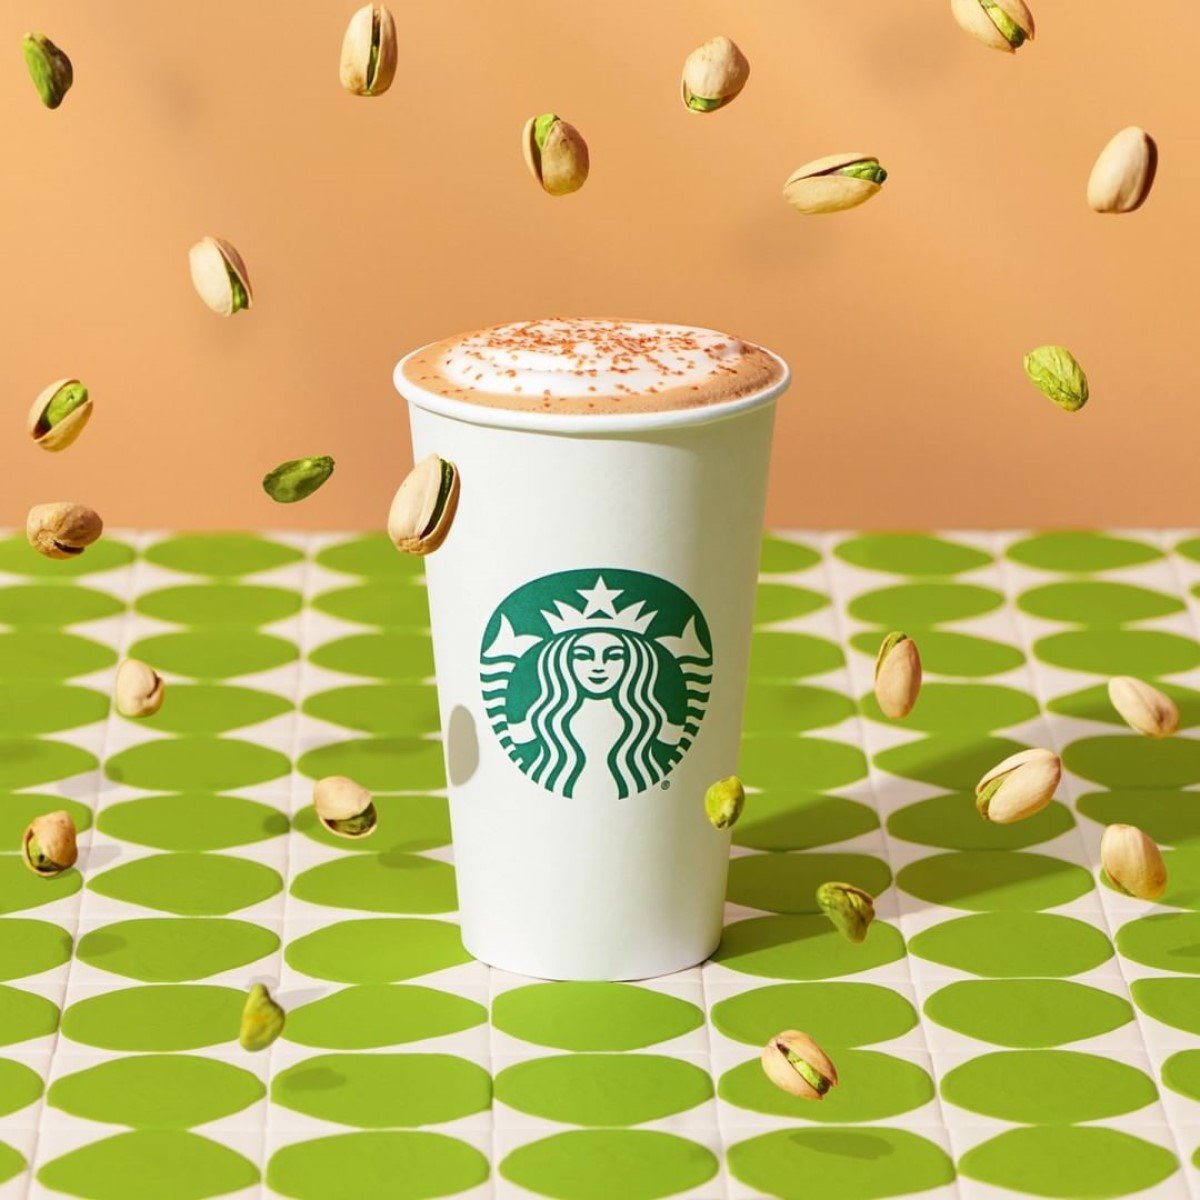 cup of hot starbucks pistachio latte on green white table with pistachios raining down